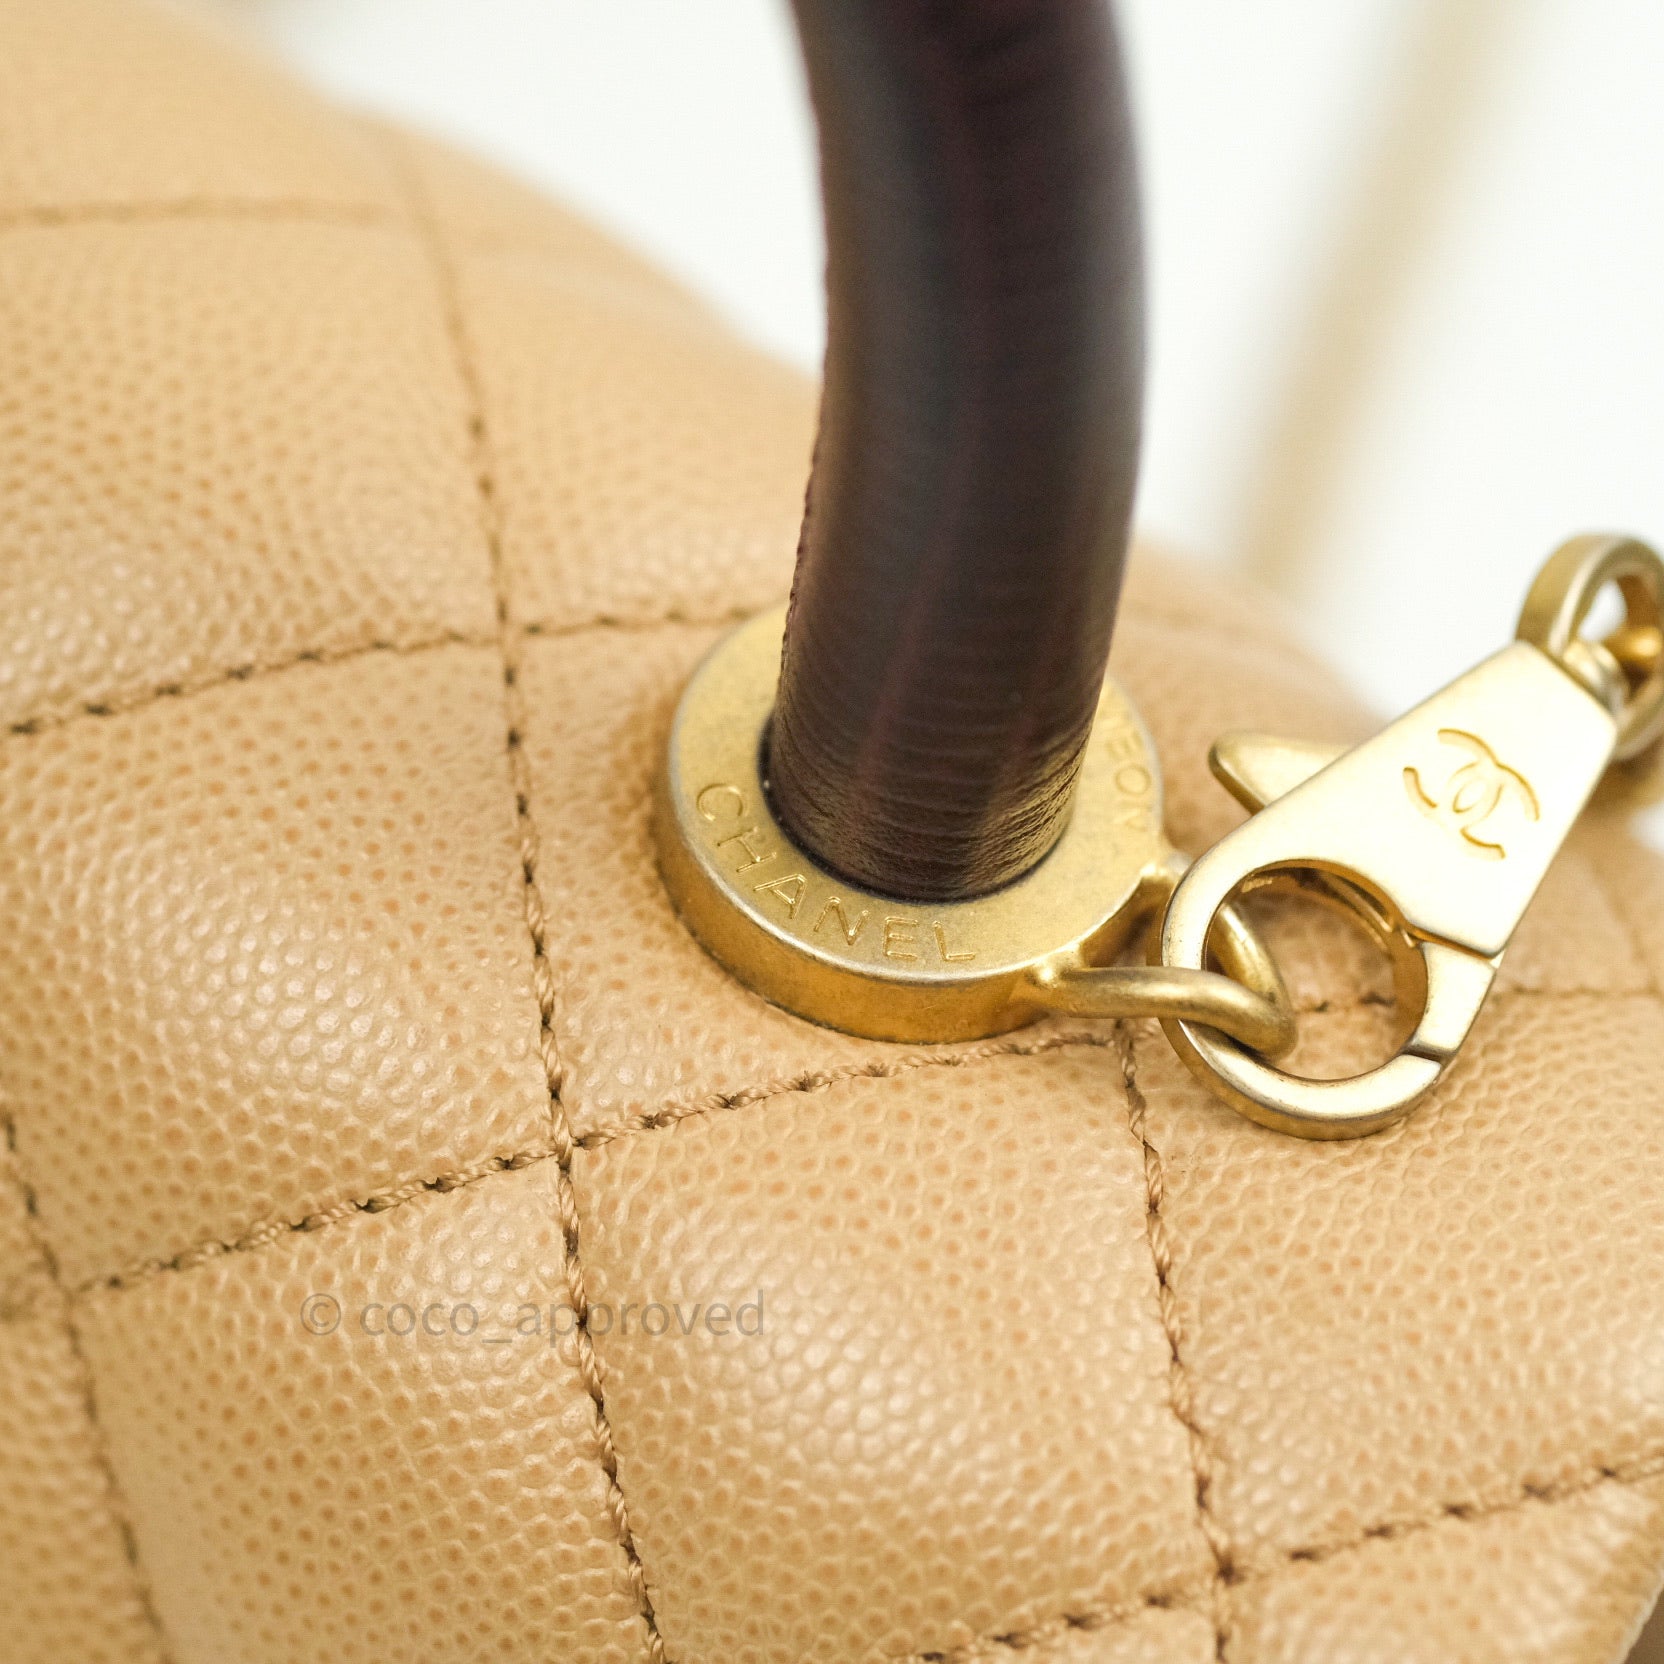 Chanel Mini Coco Handle Quilted Beige Caviar Gold Hardware Lizard Embo – Coco  Approved Studio